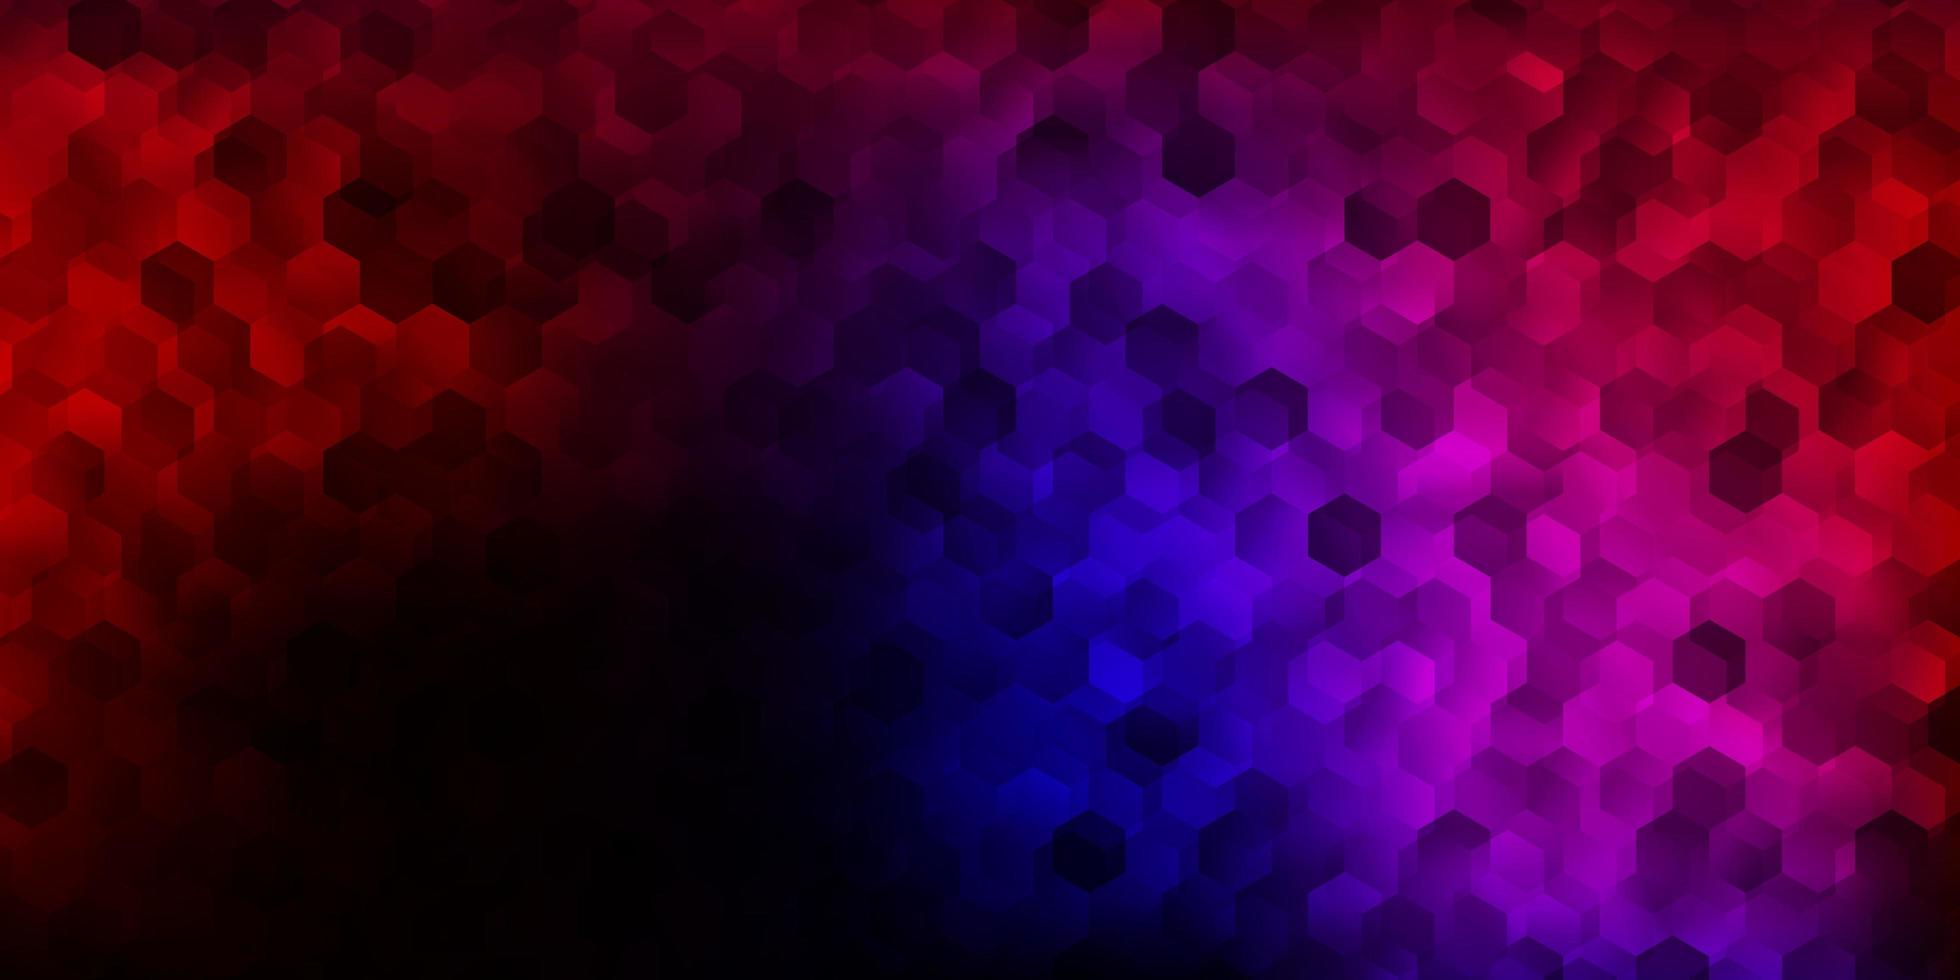 Dark pink, red vector background with hexagonal shapes.